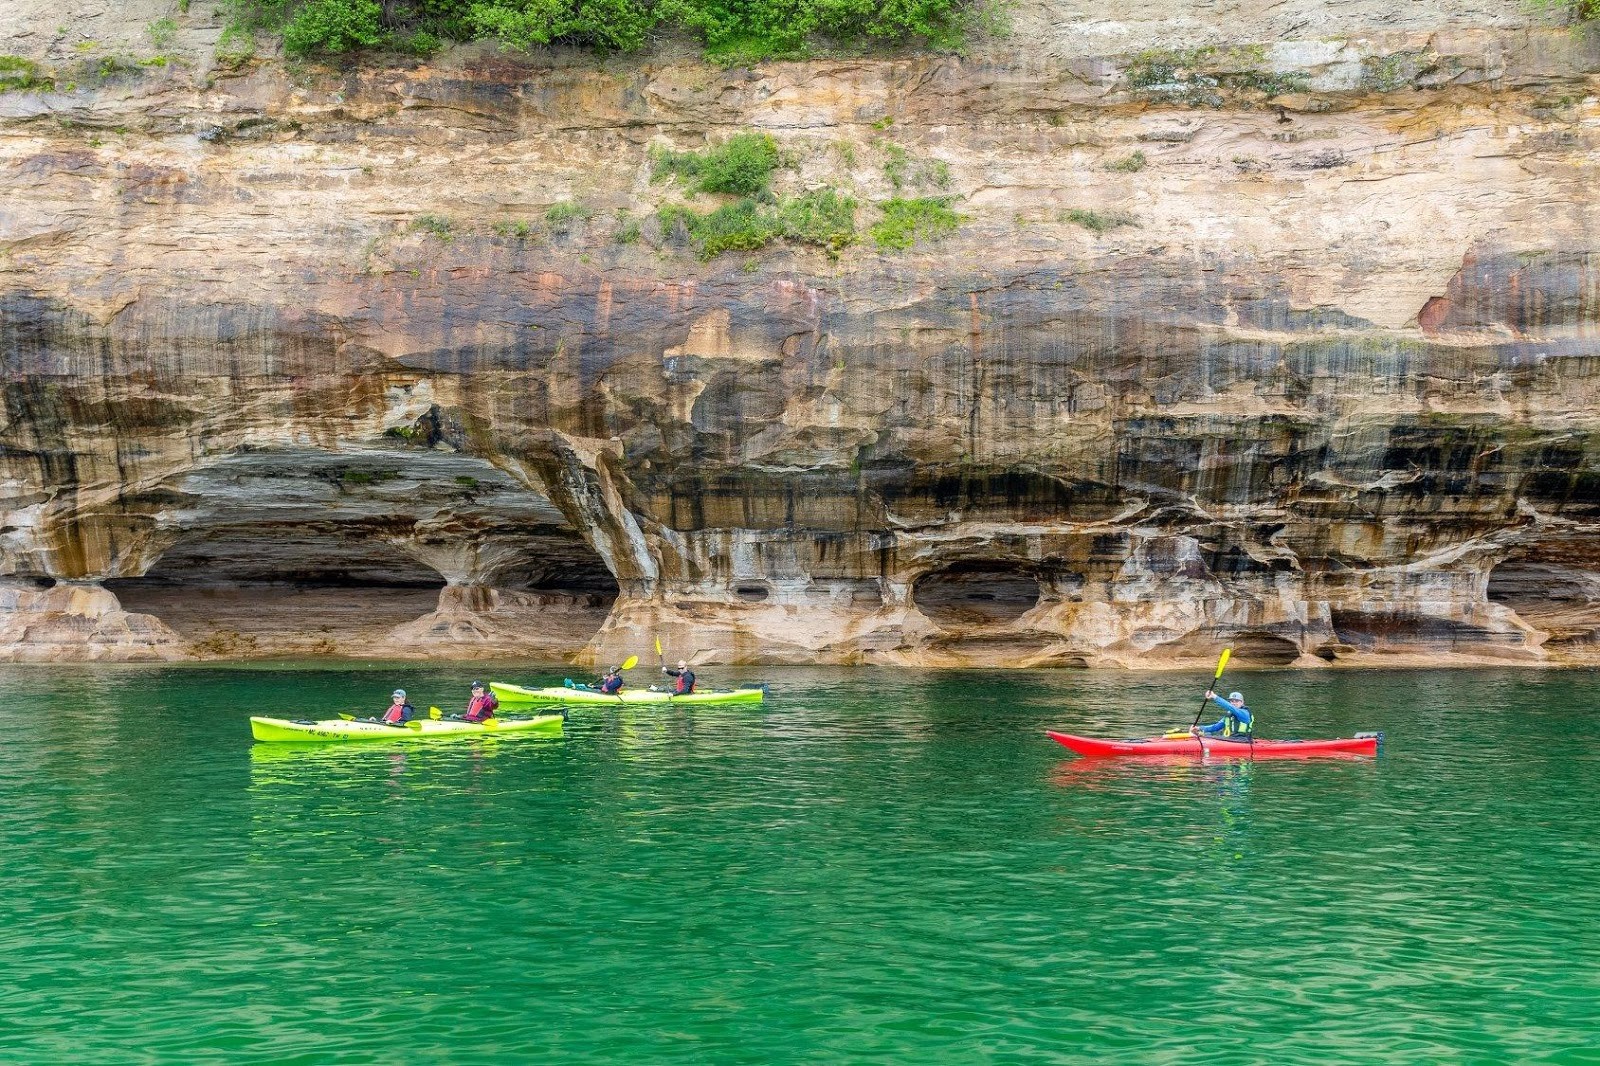 If it wasn’t for the cool clear water of Lake Superior, the turquoise color of the water might trick visitors into thinking it’s the Caribbean. PC: Pictured Rocks Kayaking.